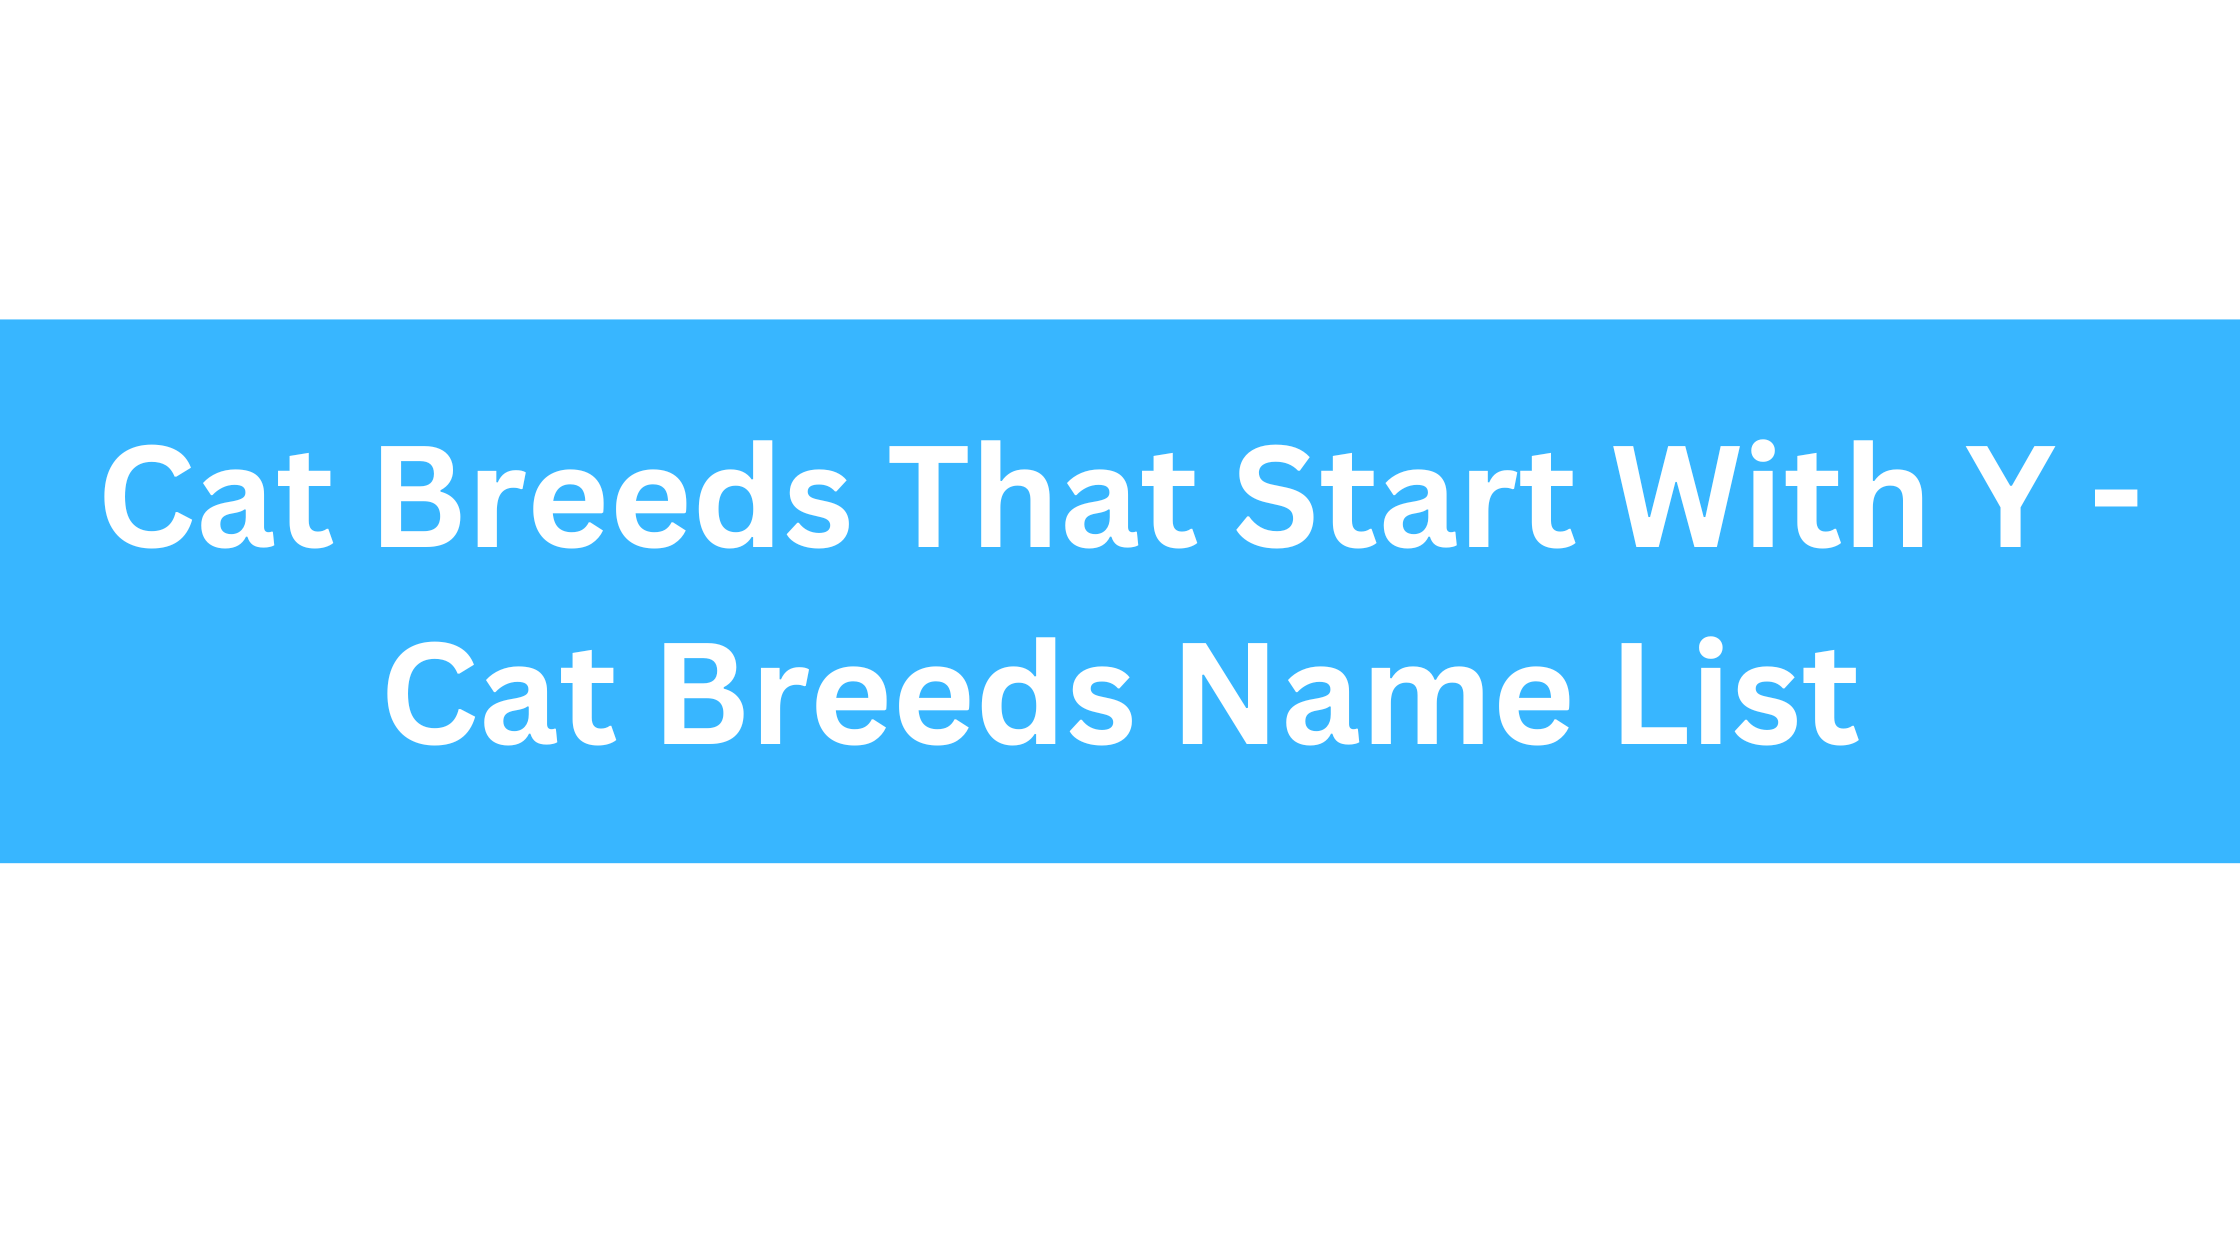 Cat Breeds That Start With Y